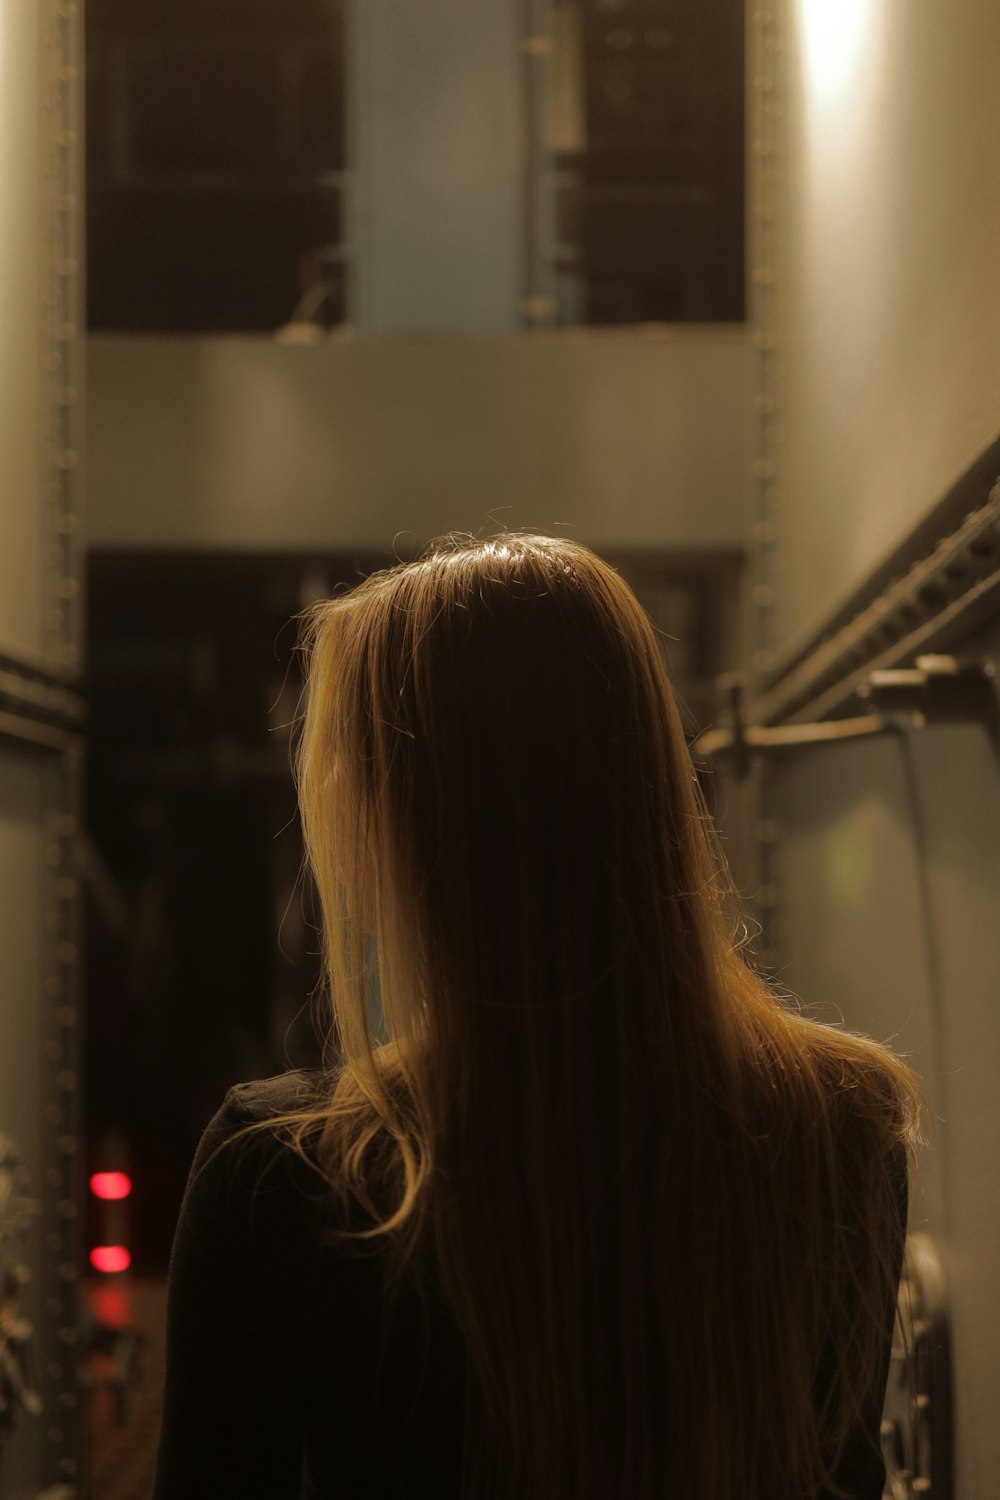 a woman with long blonde hair standing in a hallway